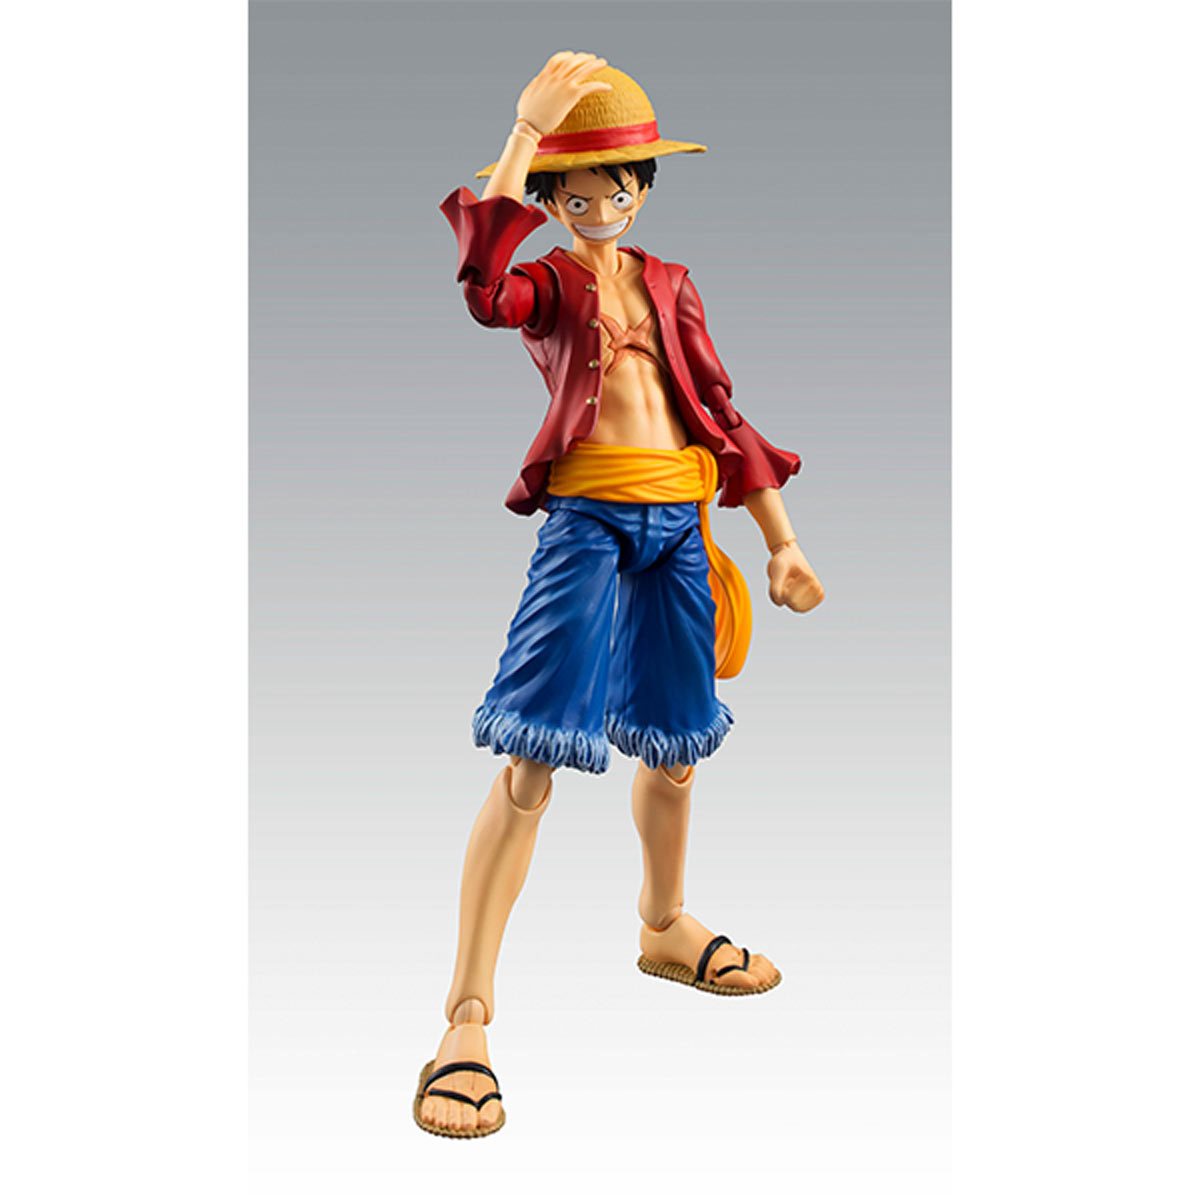 ANIME HEROES One Piece, Monkey D. Luffy Action Figure Bandai - We-R-Toys